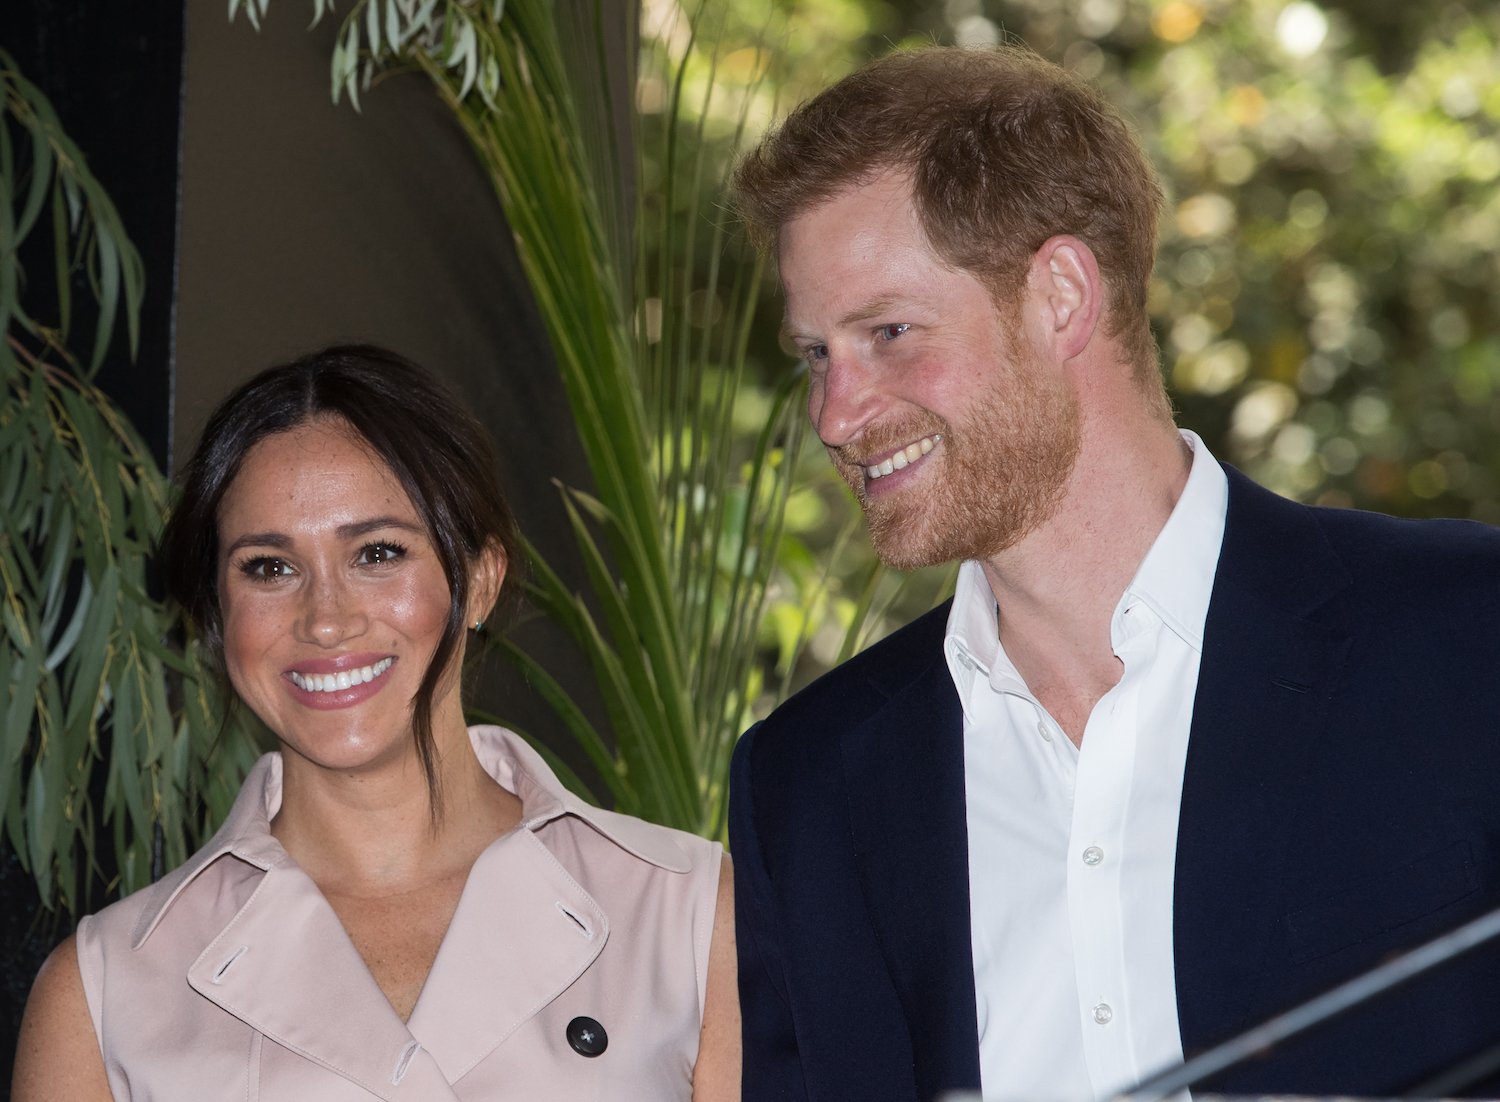 Meghan Markle and Prince Harry smile at a business reception at the British High Commissioner’s Residence in Johannesburg, South Africa